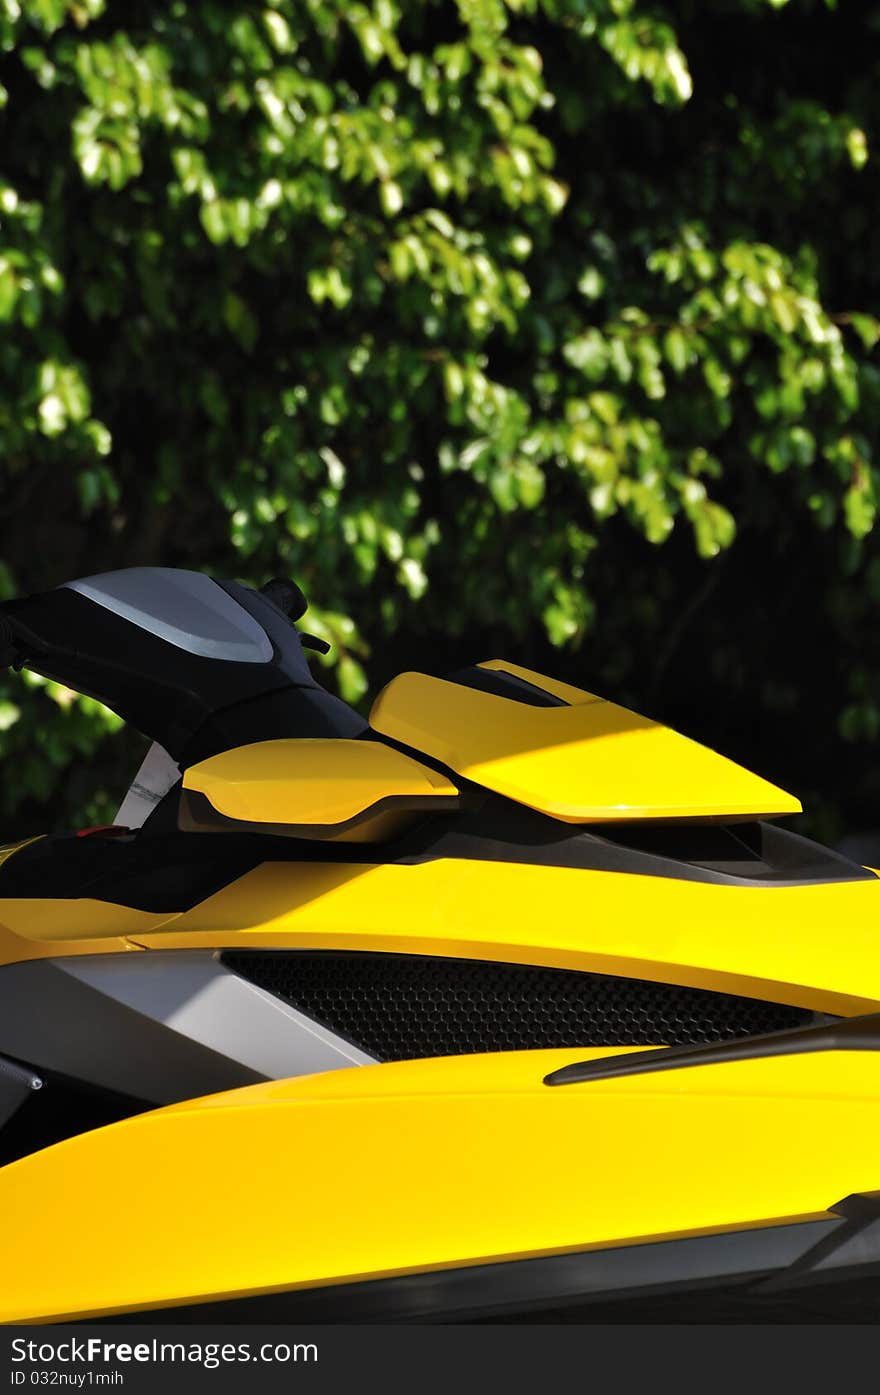 Part of a motor boat body in yellow color, under green tree background, shown as water sport or holiday and entertainment. Part of a motor boat body in yellow color, under green tree background, shown as water sport or holiday and entertainment.